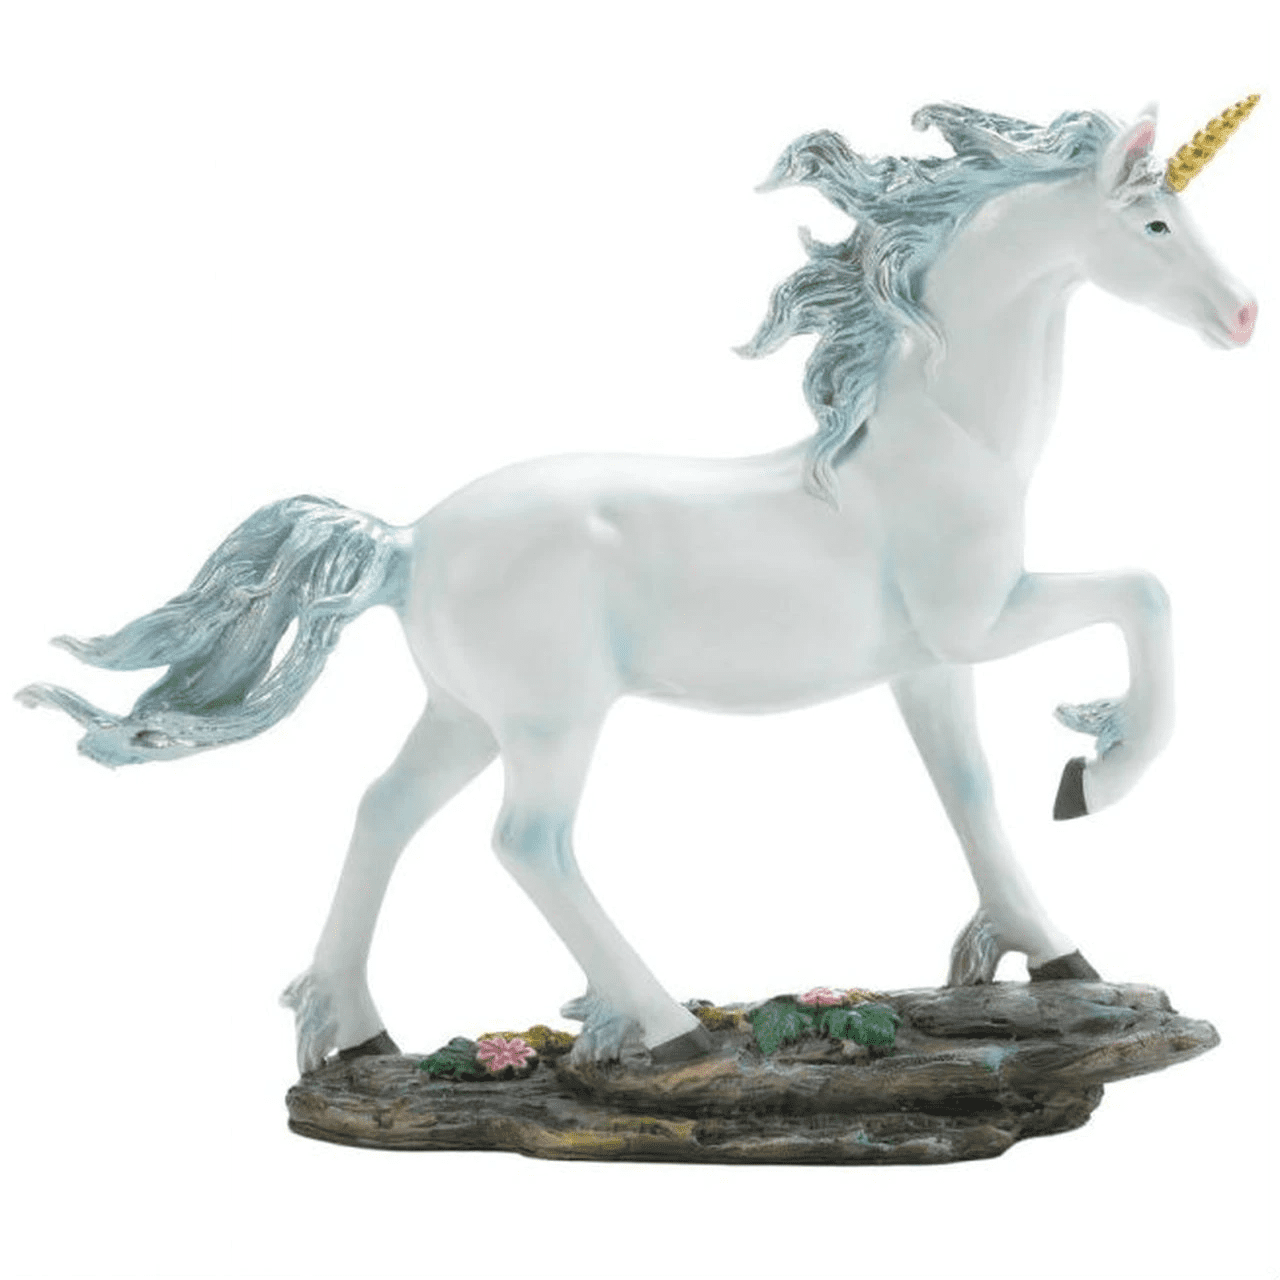 for Your Enchanted Fairy Garden 5.5 inches Tall Black Beauty Figurine Miniature Unicorn Statue